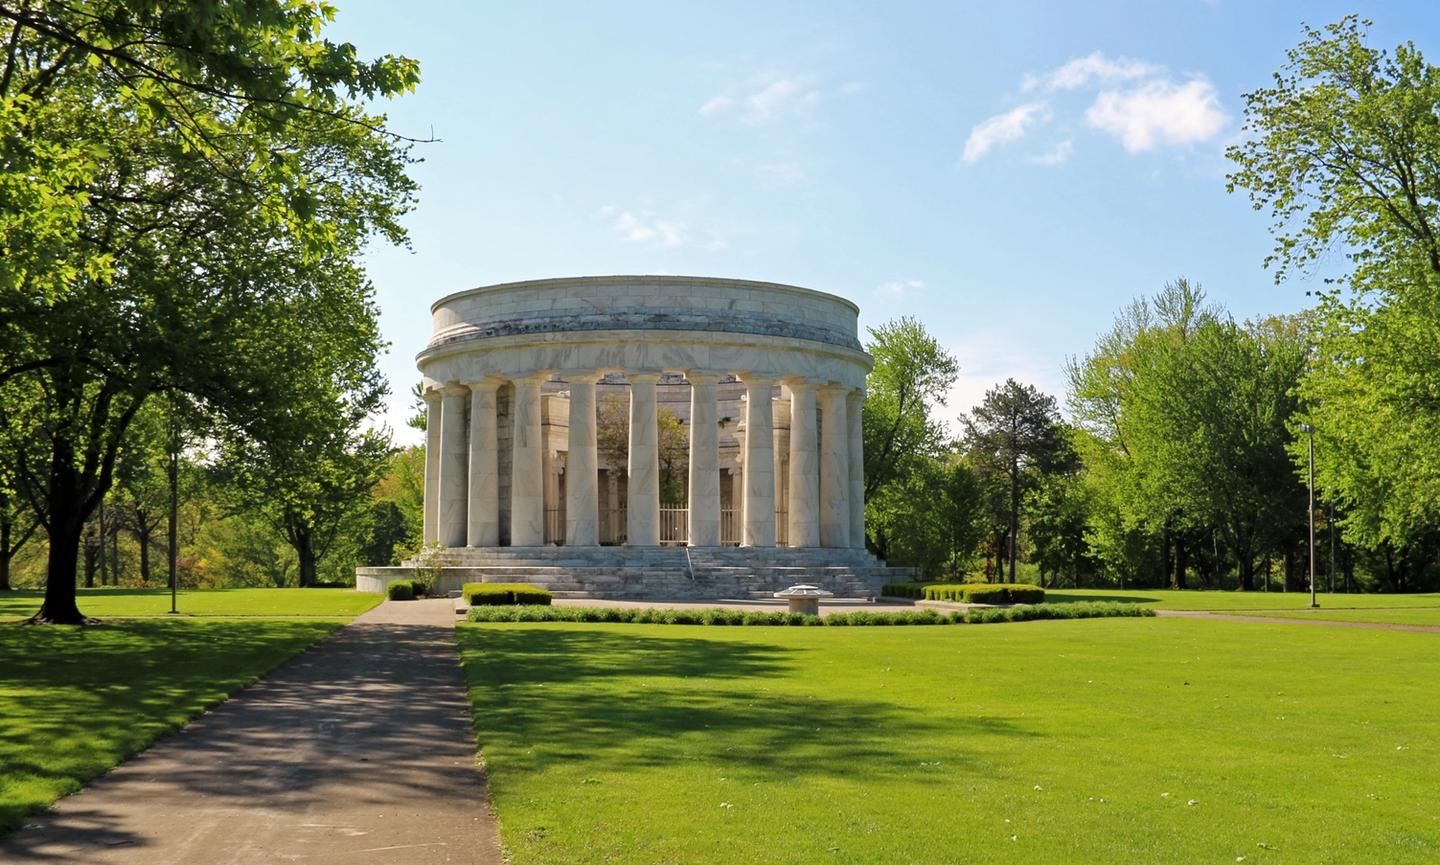 The Harding Memorial, final resting place of President and Mrs. Warren G. Harding, is the largest presidential memorial outside of Washington, D.C.